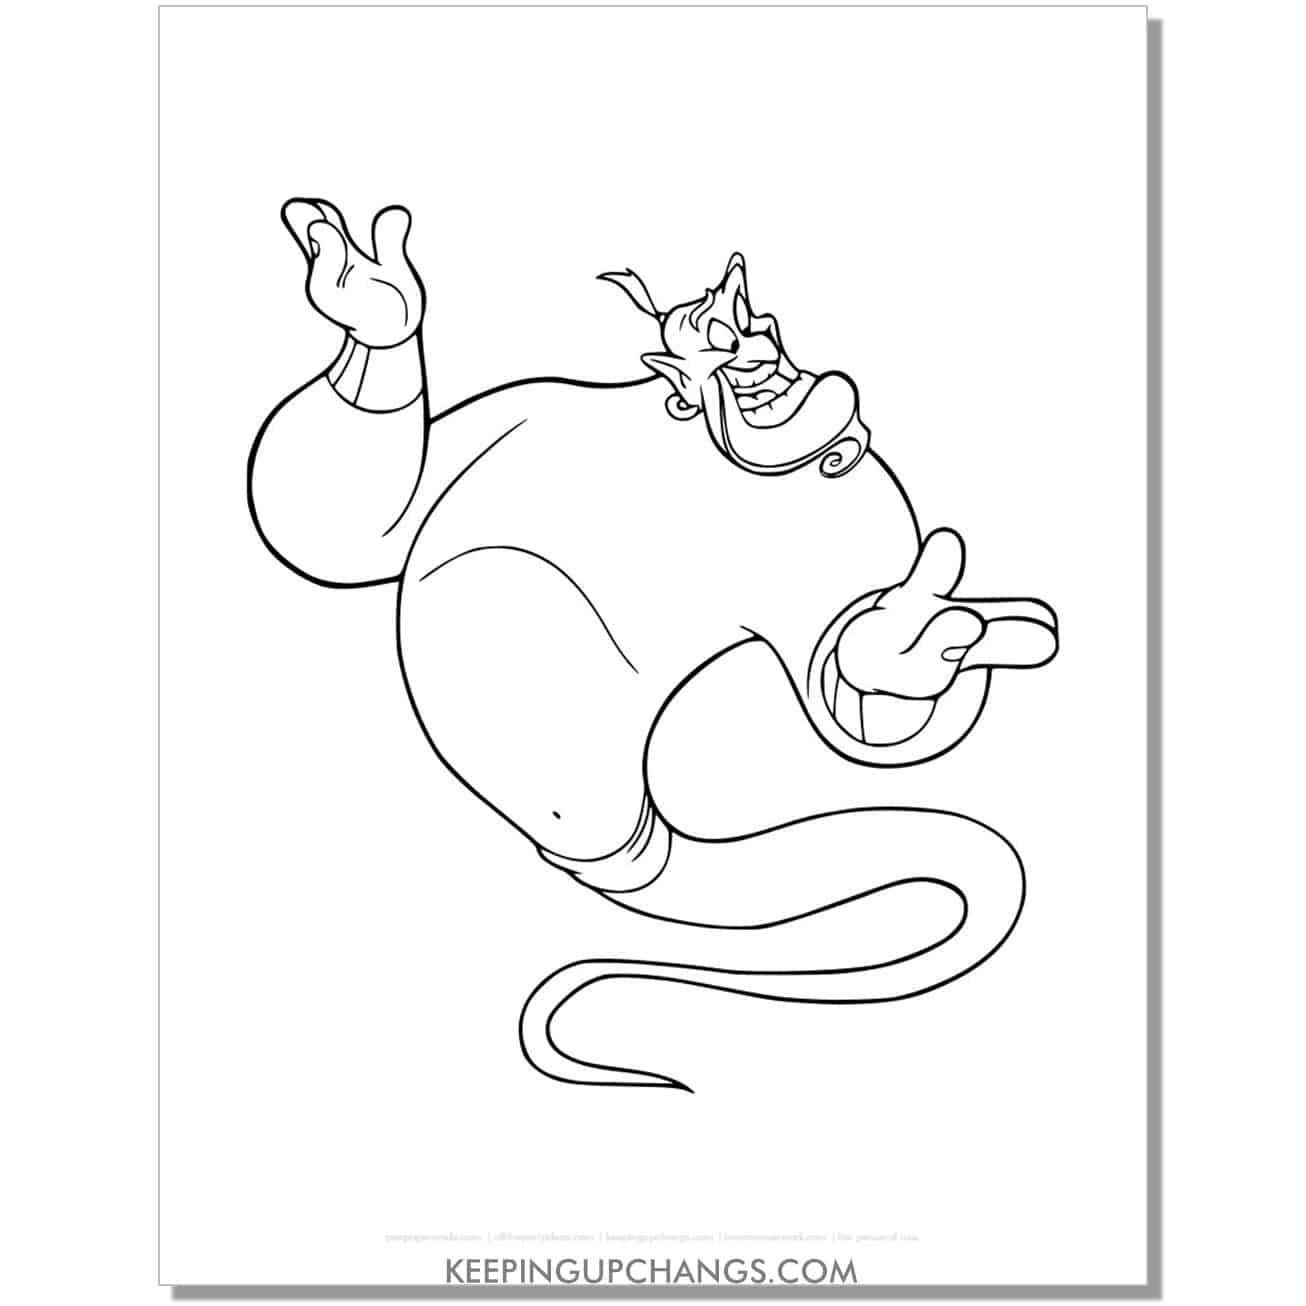 aladdin genie points hands coloring page, sheet.